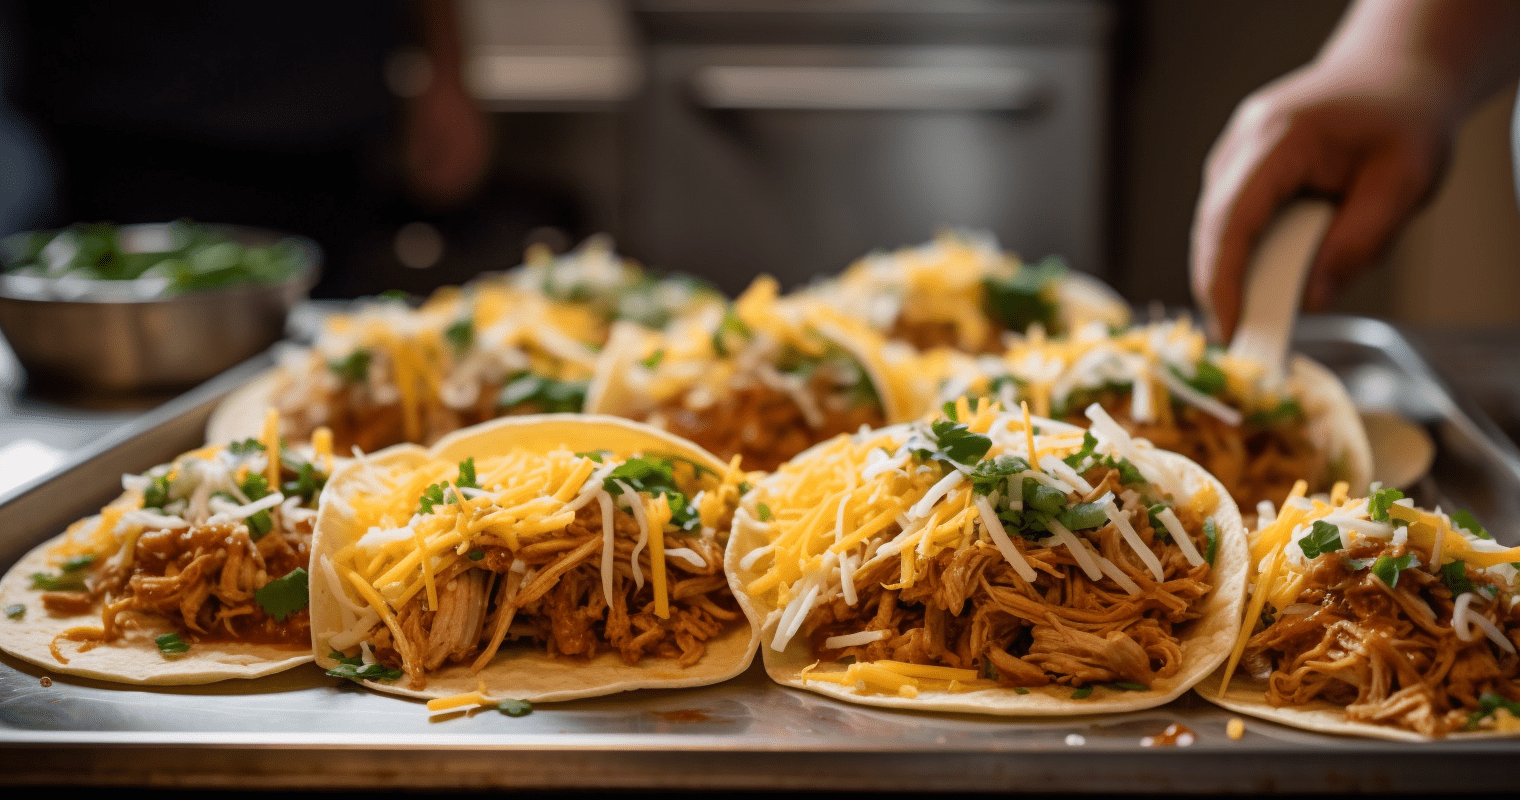 Pulled Pork Breakfast Tacos Cooking Instructions